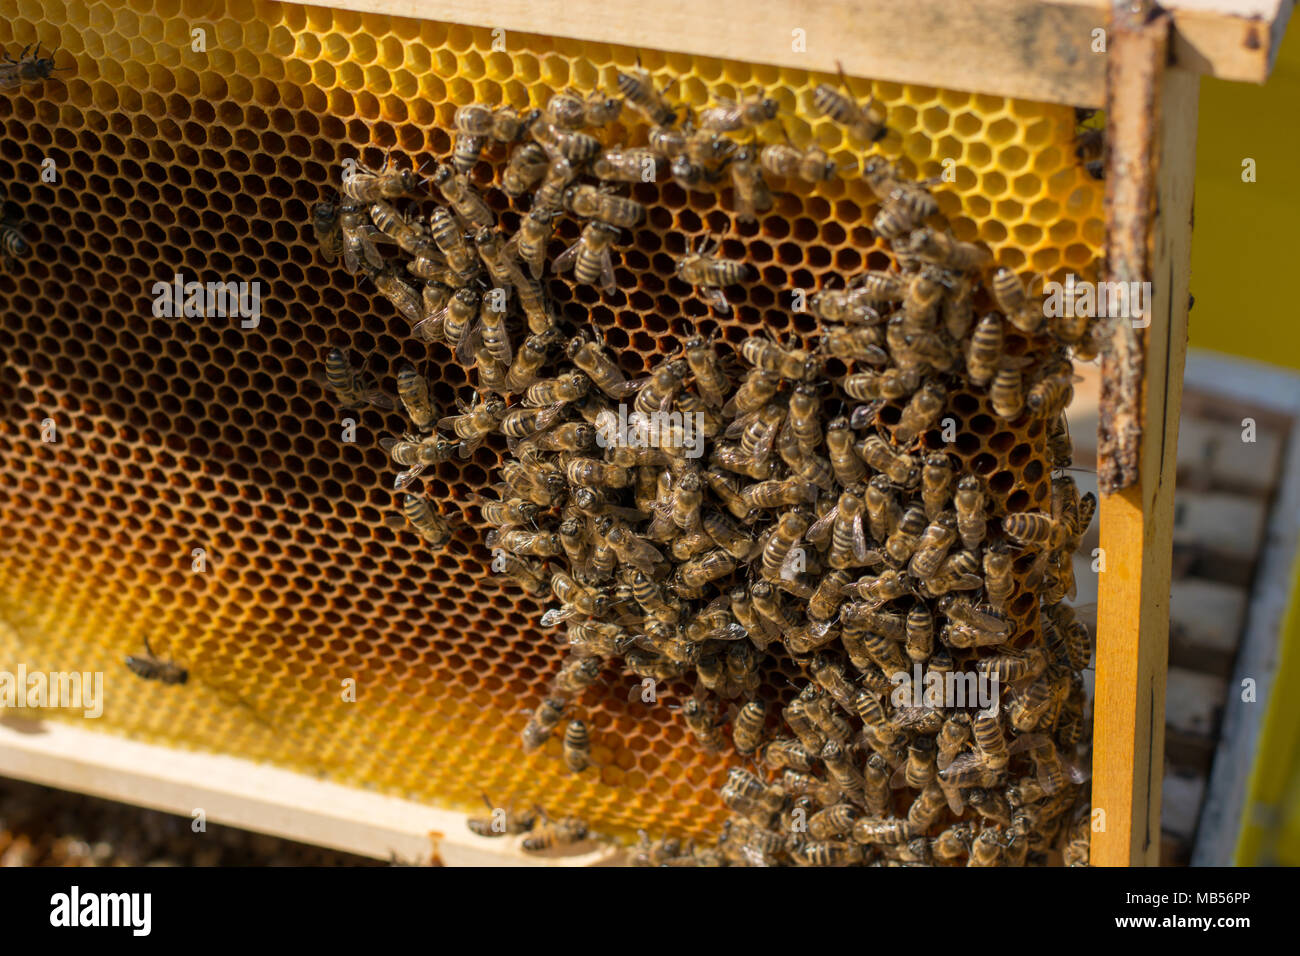 Frames of a bee hive. Beekeeper harvesting honey. The bee smoker is used to calm bees before frame removal. Beekeeper Inspecting Bee Hive Stock Photo